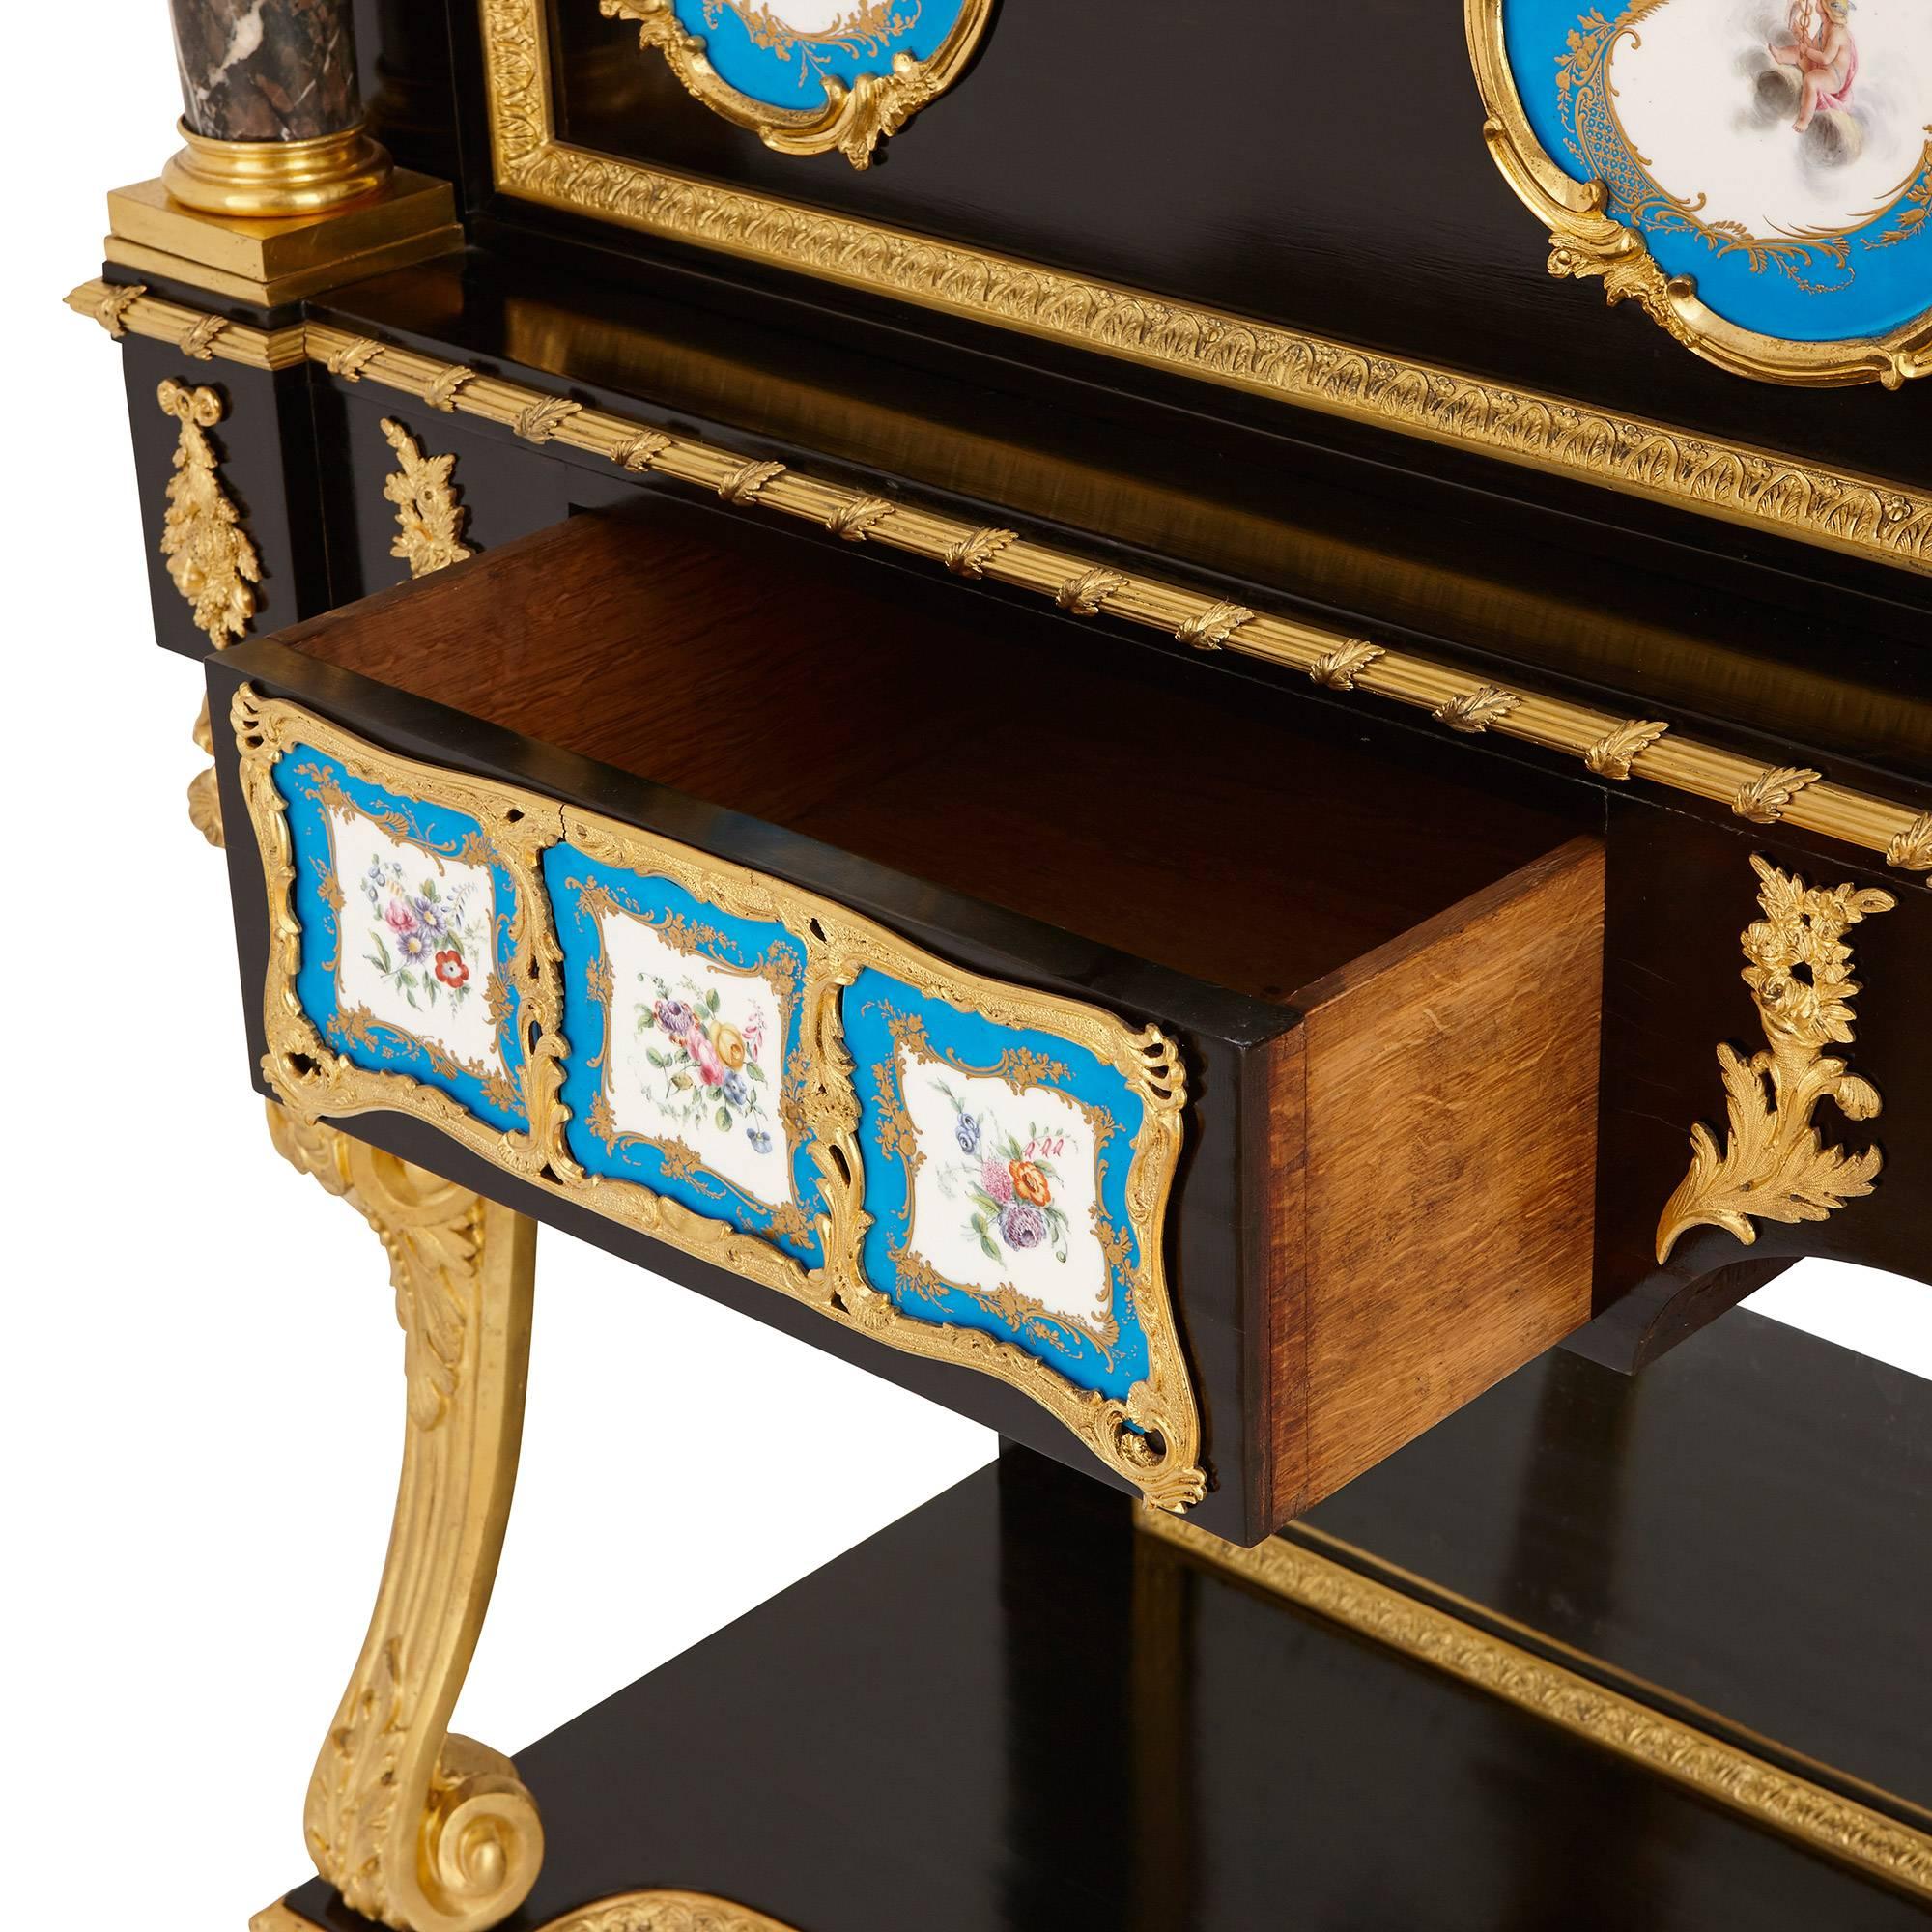 19th Century Pair of Victorian Ormolu, Marble and Porcelain Secretaires